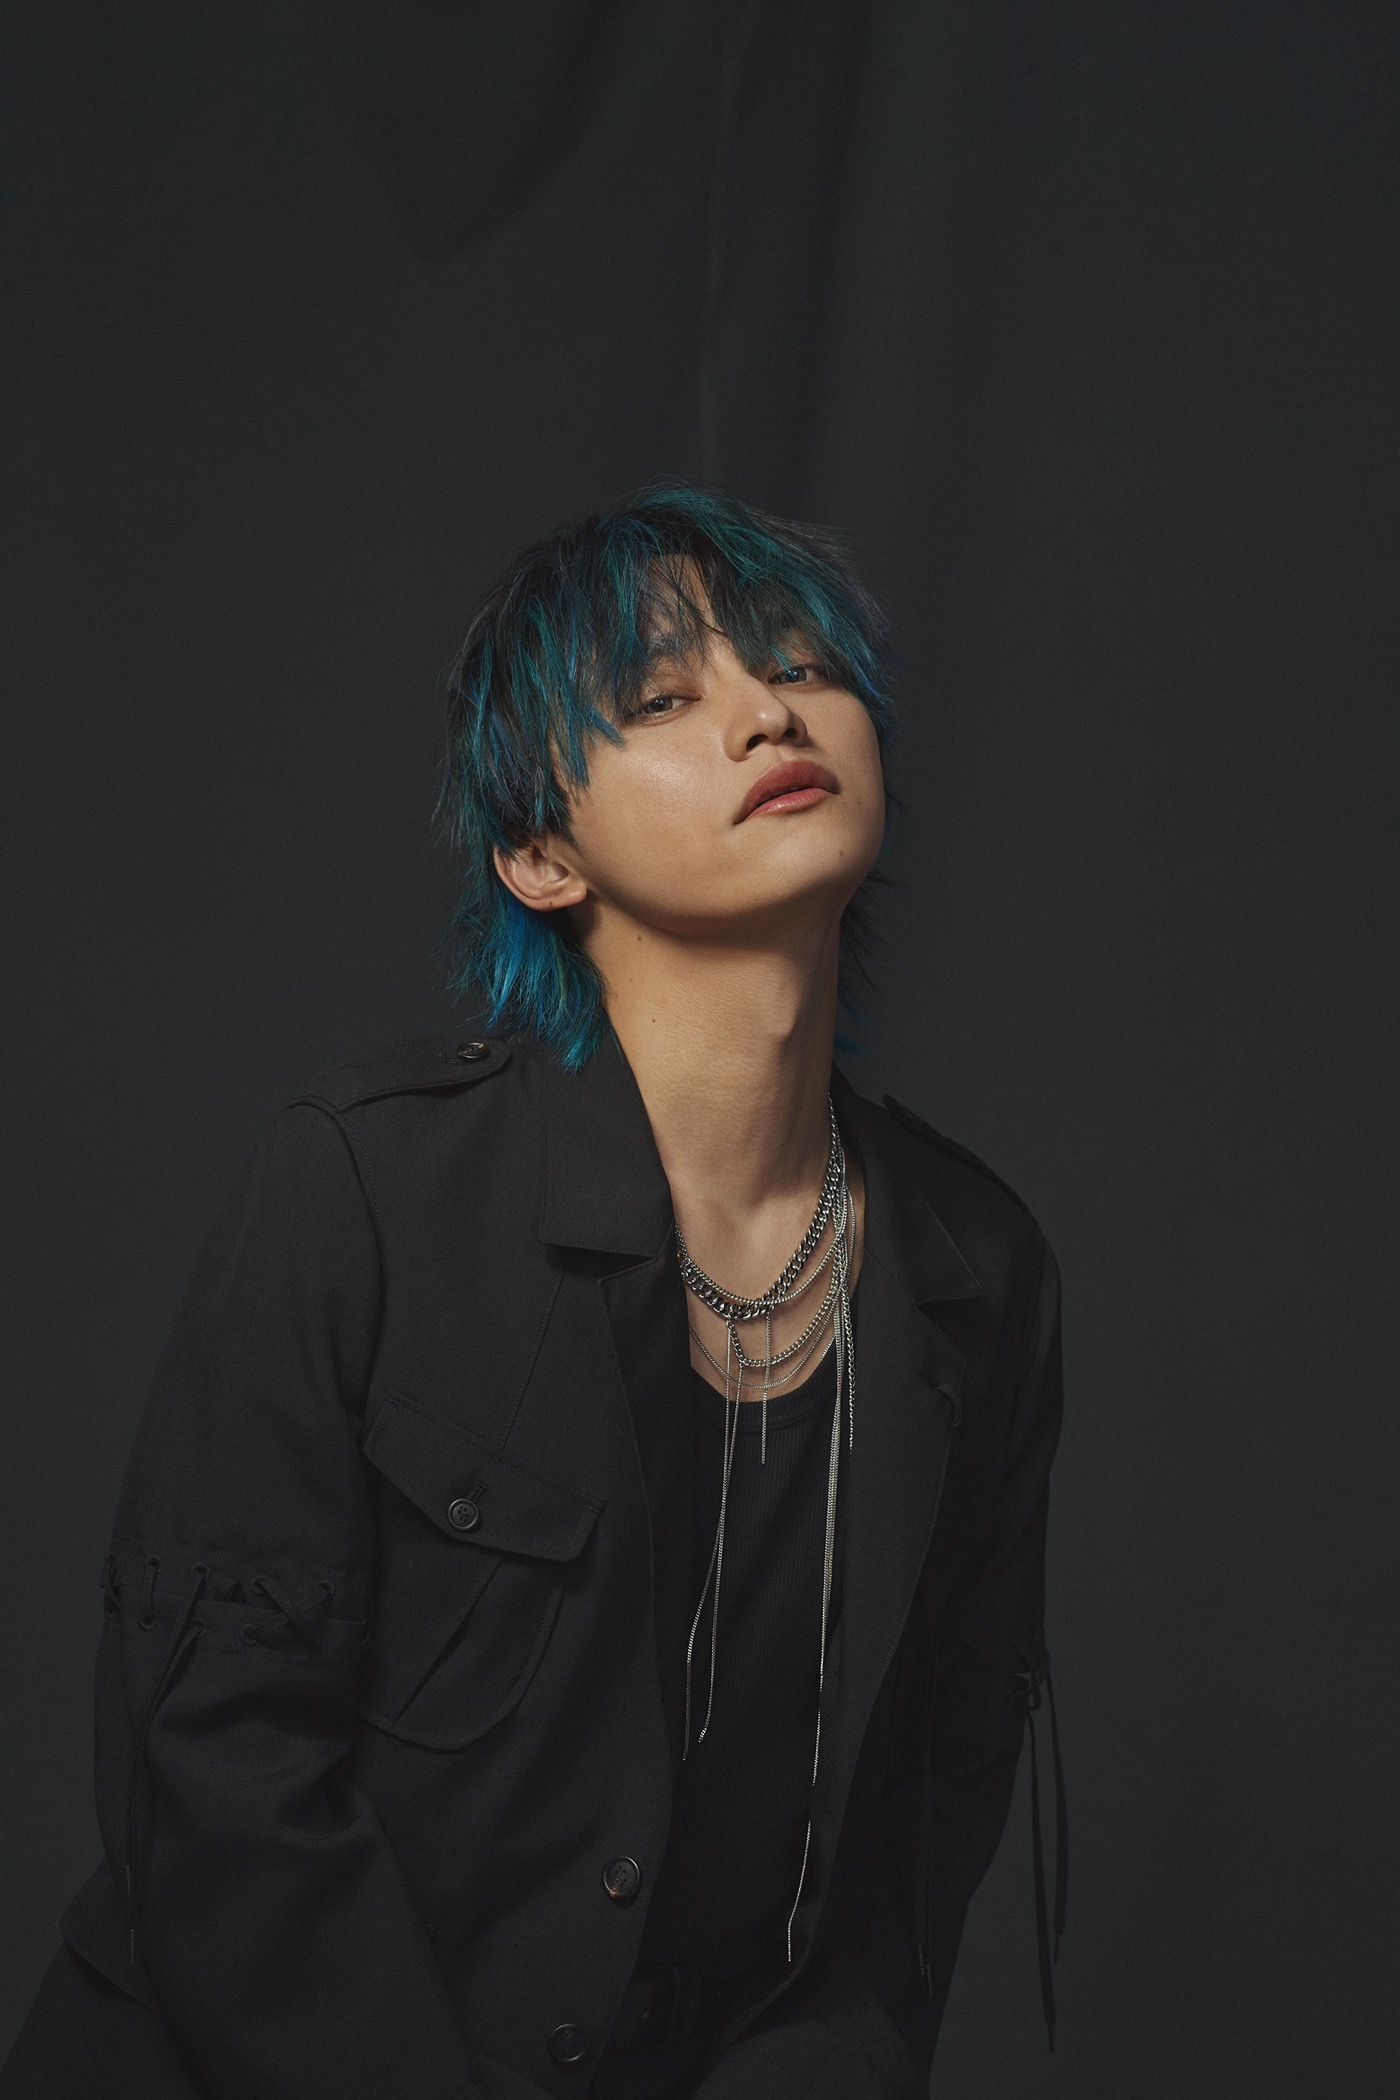 SKY-HI、自身の誕生日にニューアルバム『THE DEBUT』のリリースが決定 - 画像一覧（1/1）